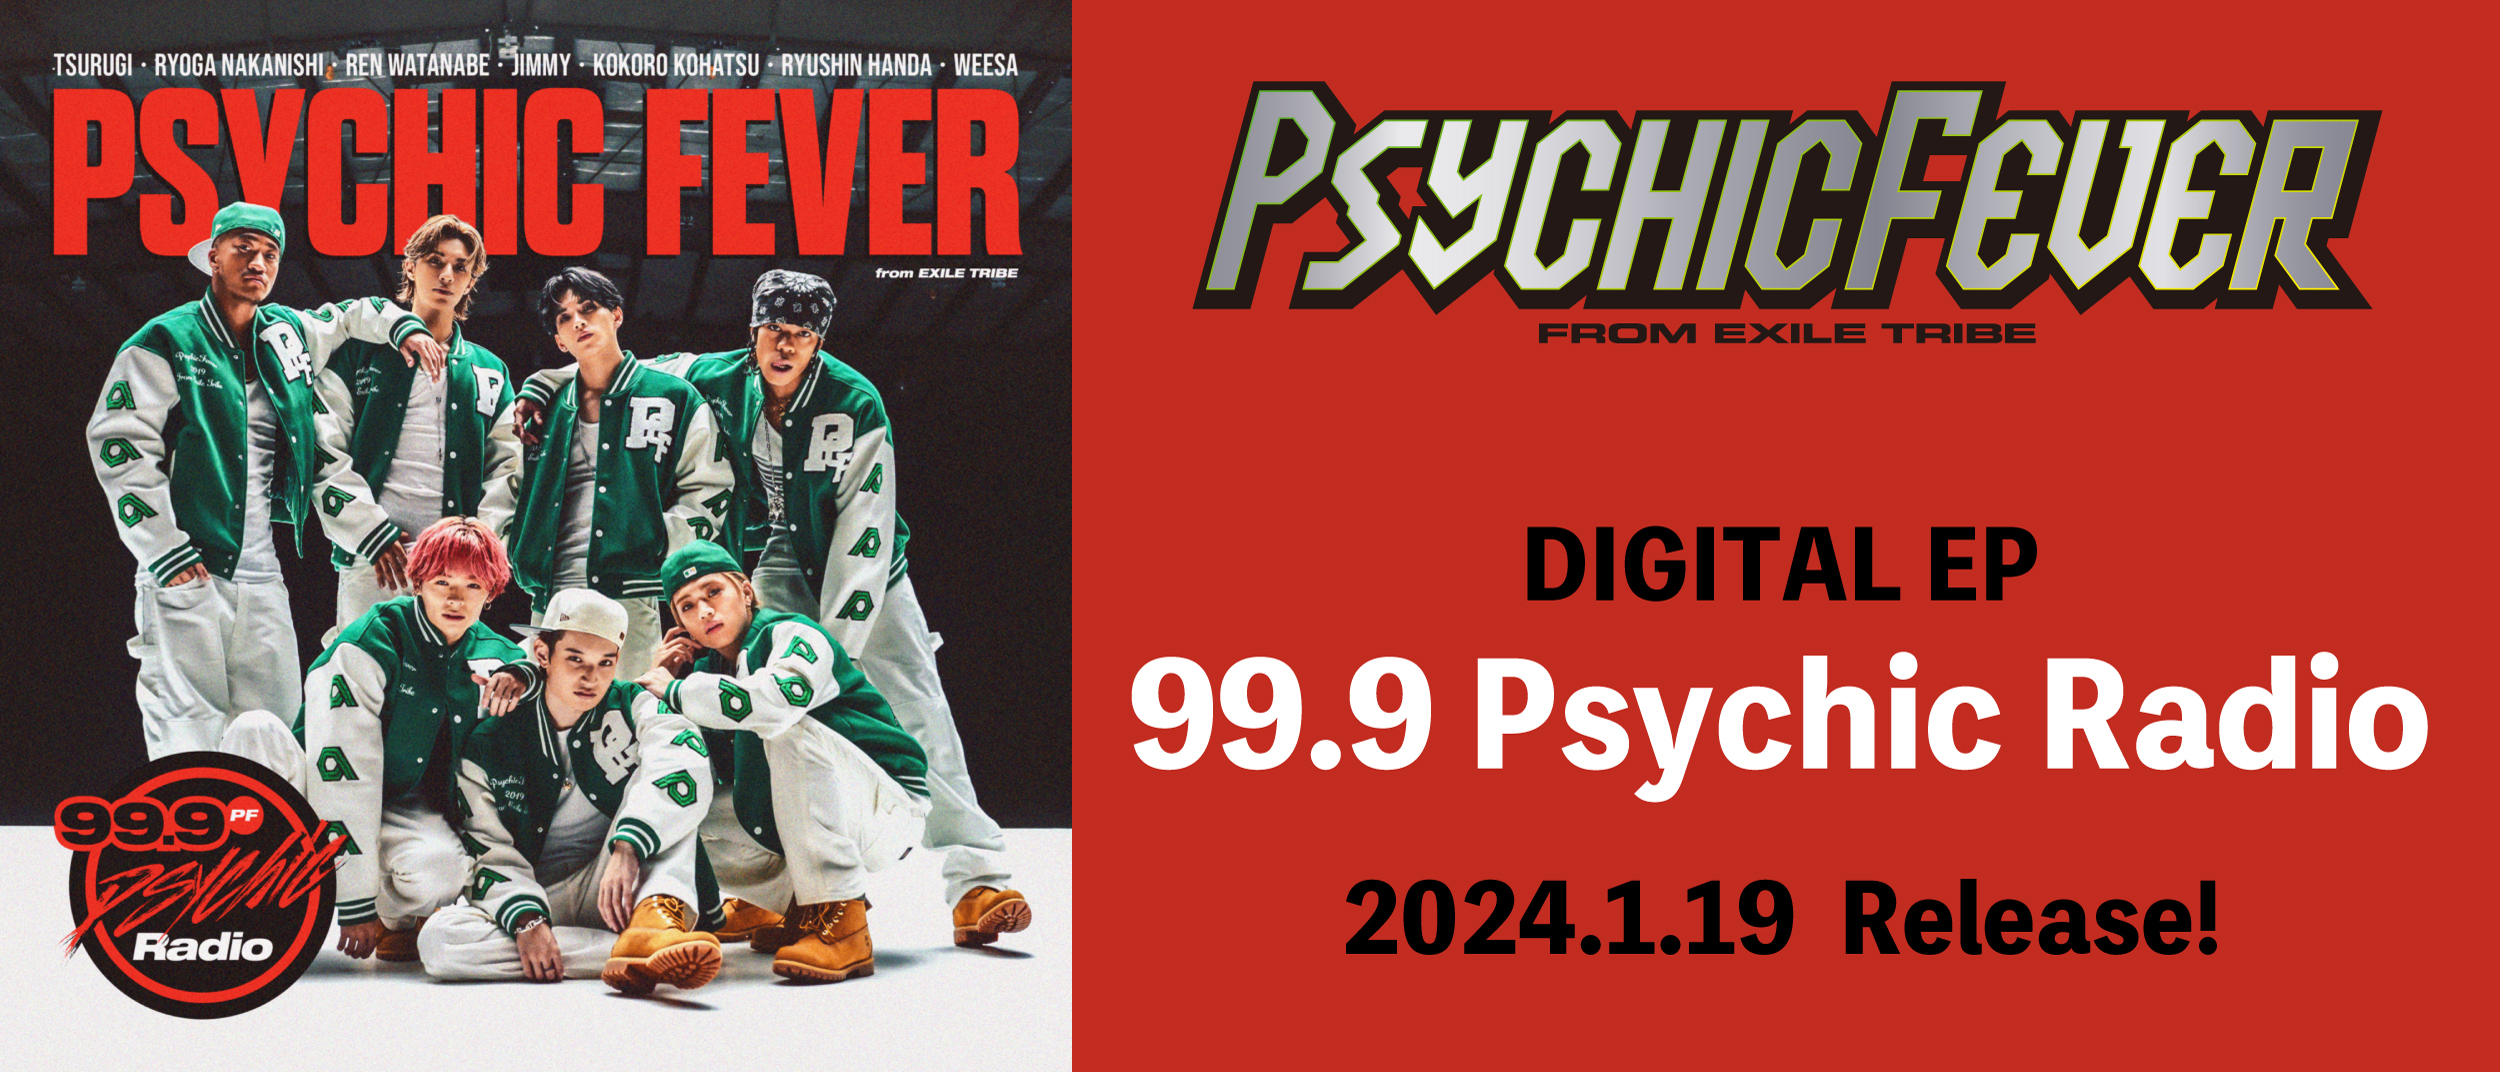 PSYCHIC FEVER from EXILE TRIBE 『99.9 Psychic Radio』